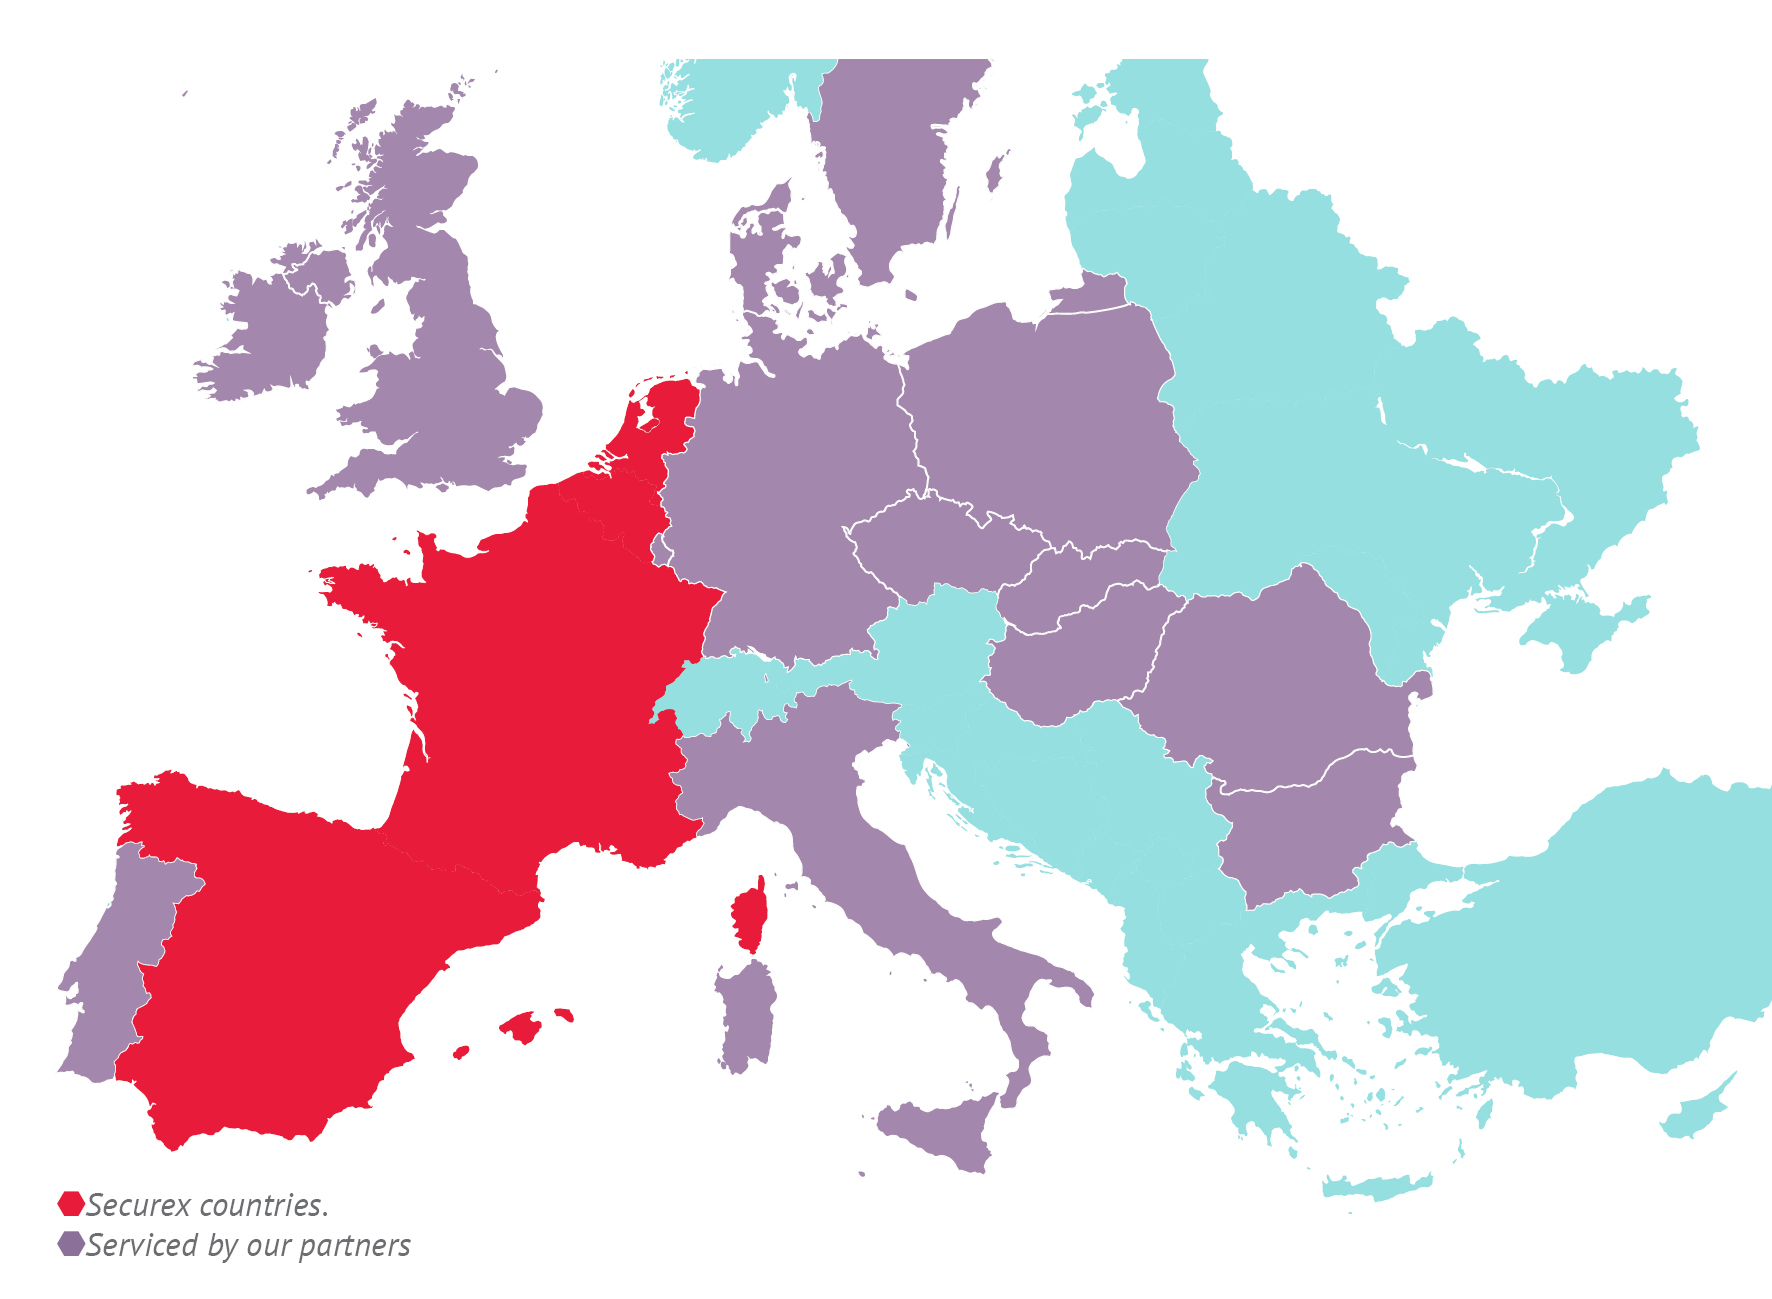 Map of Europe showing the countries in which Securex operates